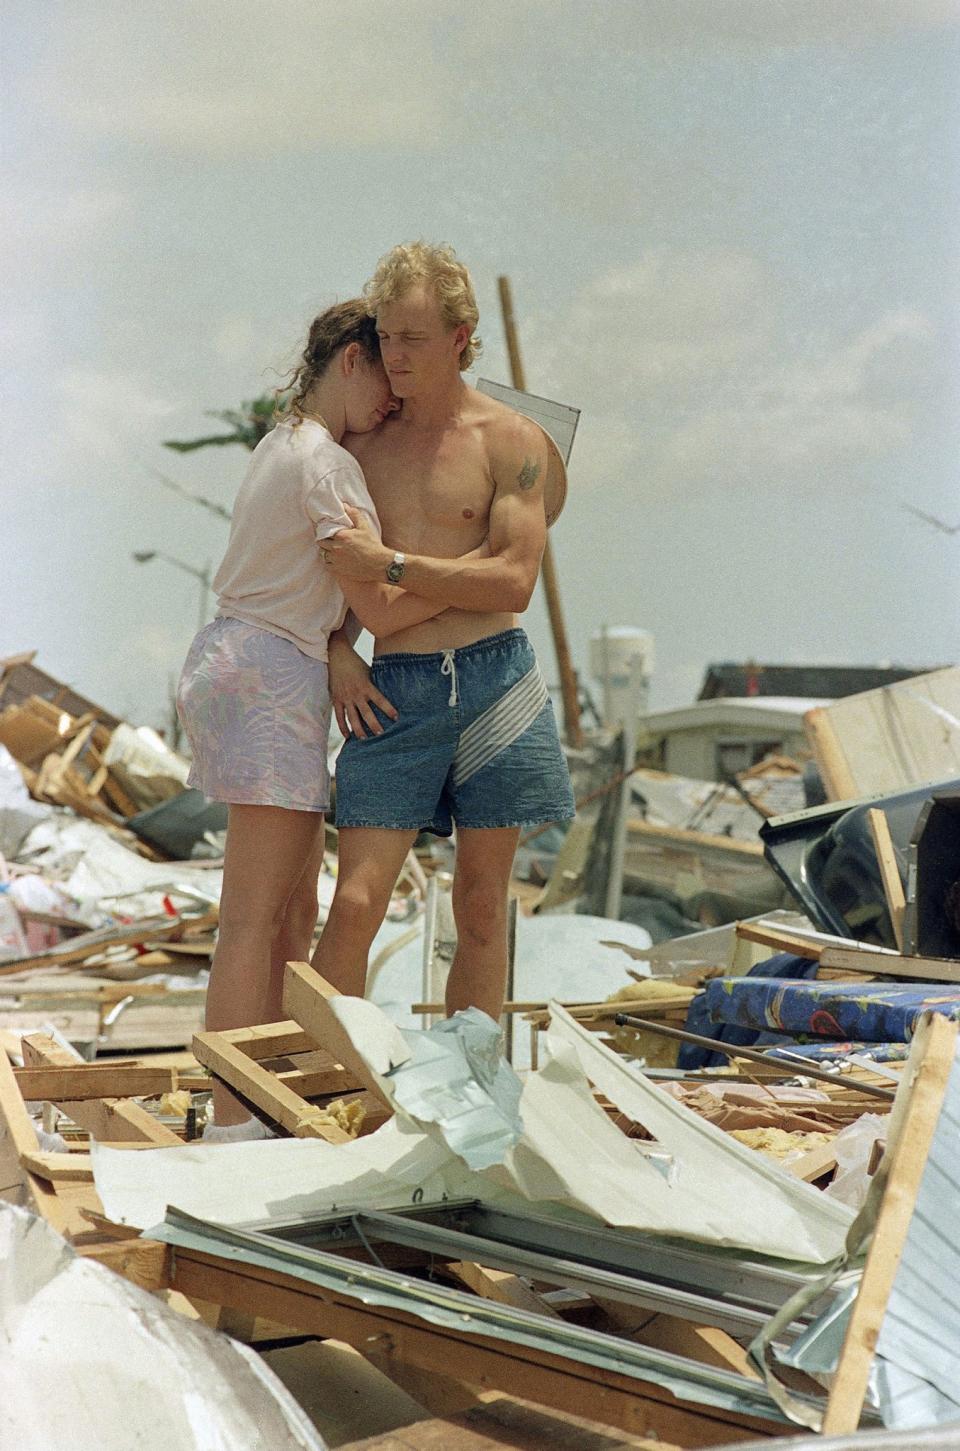 <p>Richard Cilinceon hugs his wife Mitzi at the site of their house trailer which they moved into in June, in Homestead, Fla., Aug. 25, 1992. Hurricane Andrew destroyed the couple’s home and ruined most of their personal possessions. (AP Photo/Kathy Willens) </p>